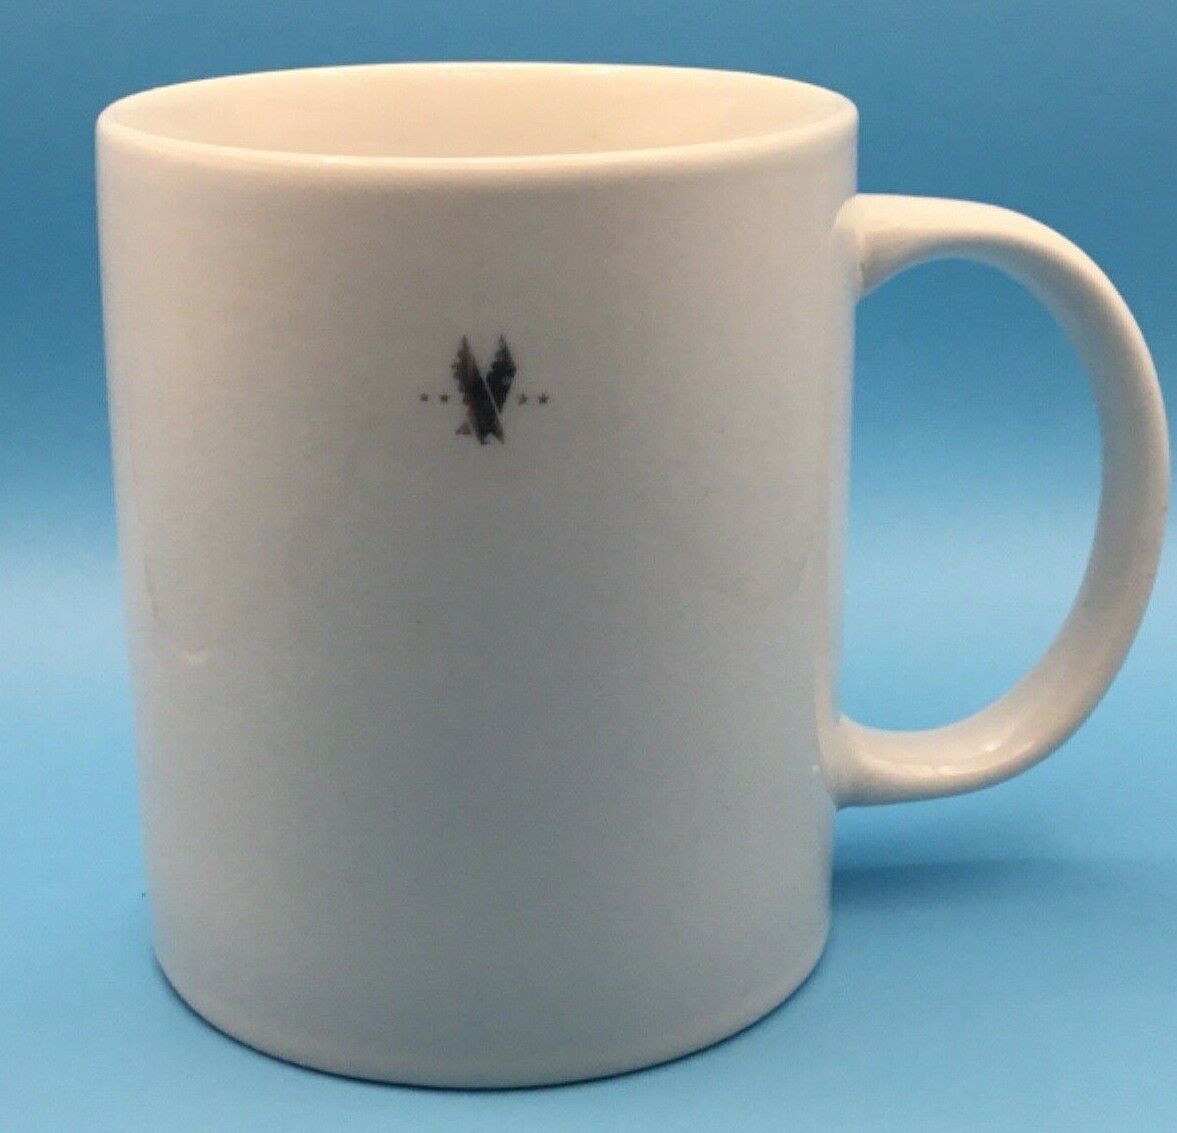 AMKO Exclusively for AMERICAN AIRLINES White Mug 1st Class 73MU003 Small Logo 